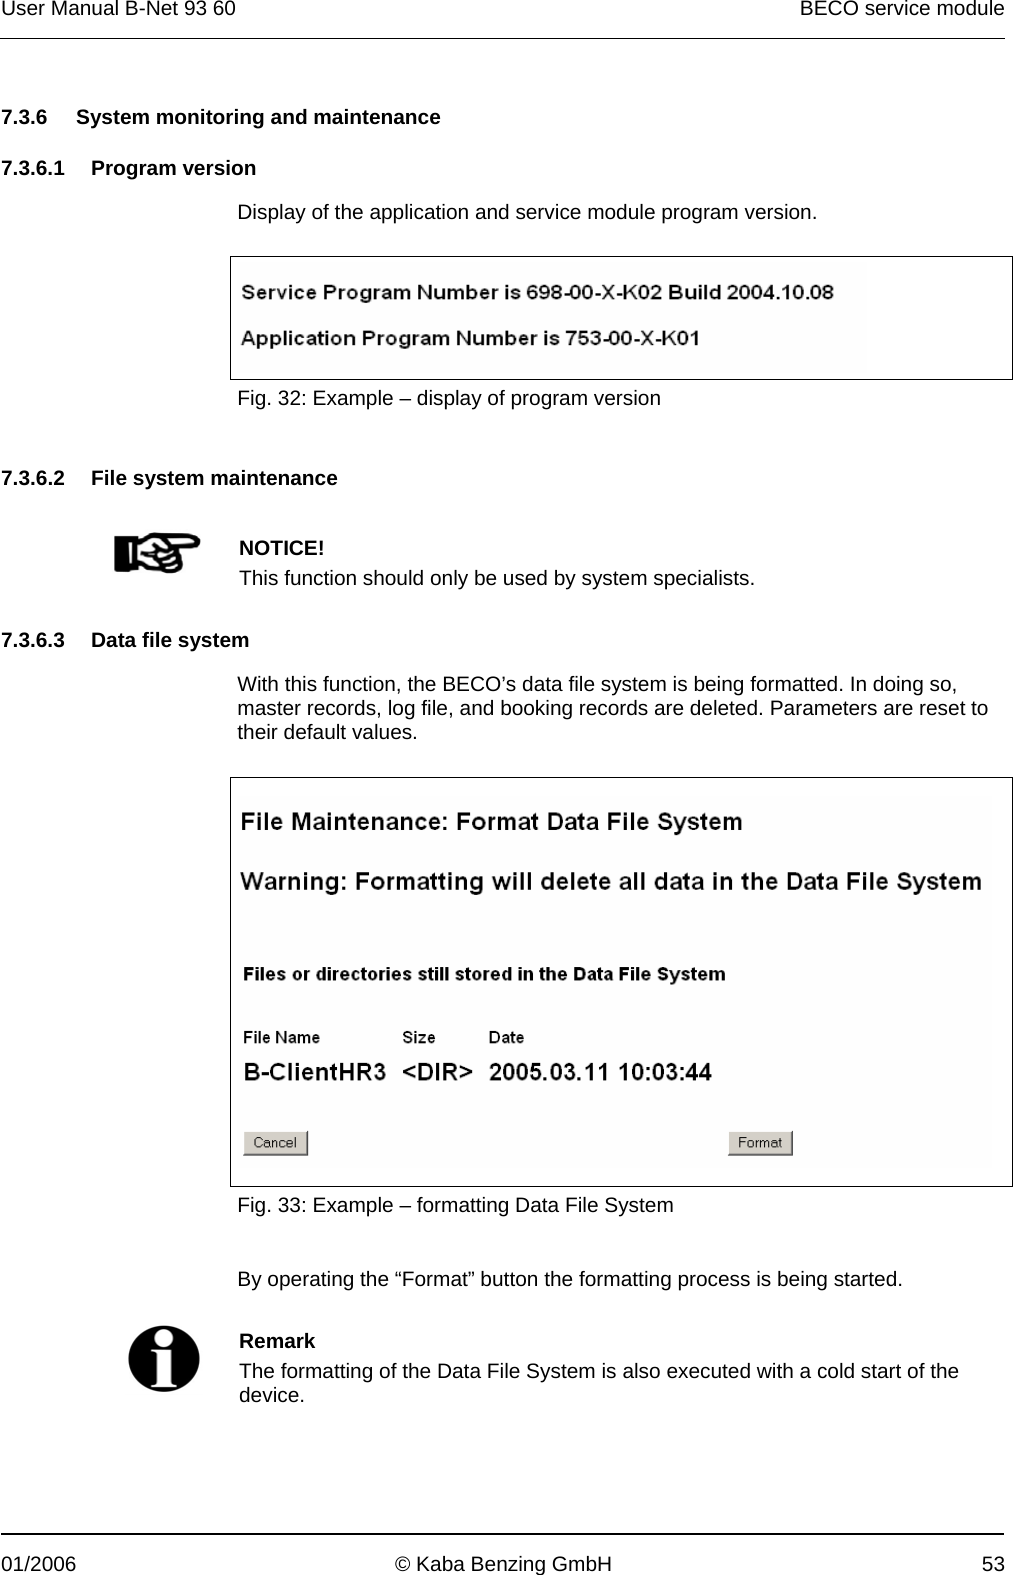 User Manual B-Net 93 60   BECO service module  01/2006  © Kaba Benzing GmbH  53   7.3.6  System monitoring and maintenance  7.3.6.1 Program version  Display of the application and service module program version.    Fig. 32: Example – display of program version   7.3.6.2 File system maintenance     NOTICE! This function should only be used by system specialists.   7.3.6.3  Data file system  With this function, the BECO’s data file system is being formatted. In doing so, master records, log file, and booking records are deleted. Parameters are reset to their default values.     Fig. 33: Example – formatting Data File System   By operating the “Format” button the formatting process is being started.    Remark The formatting of the Data File System is also executed with a cold start of the device.  